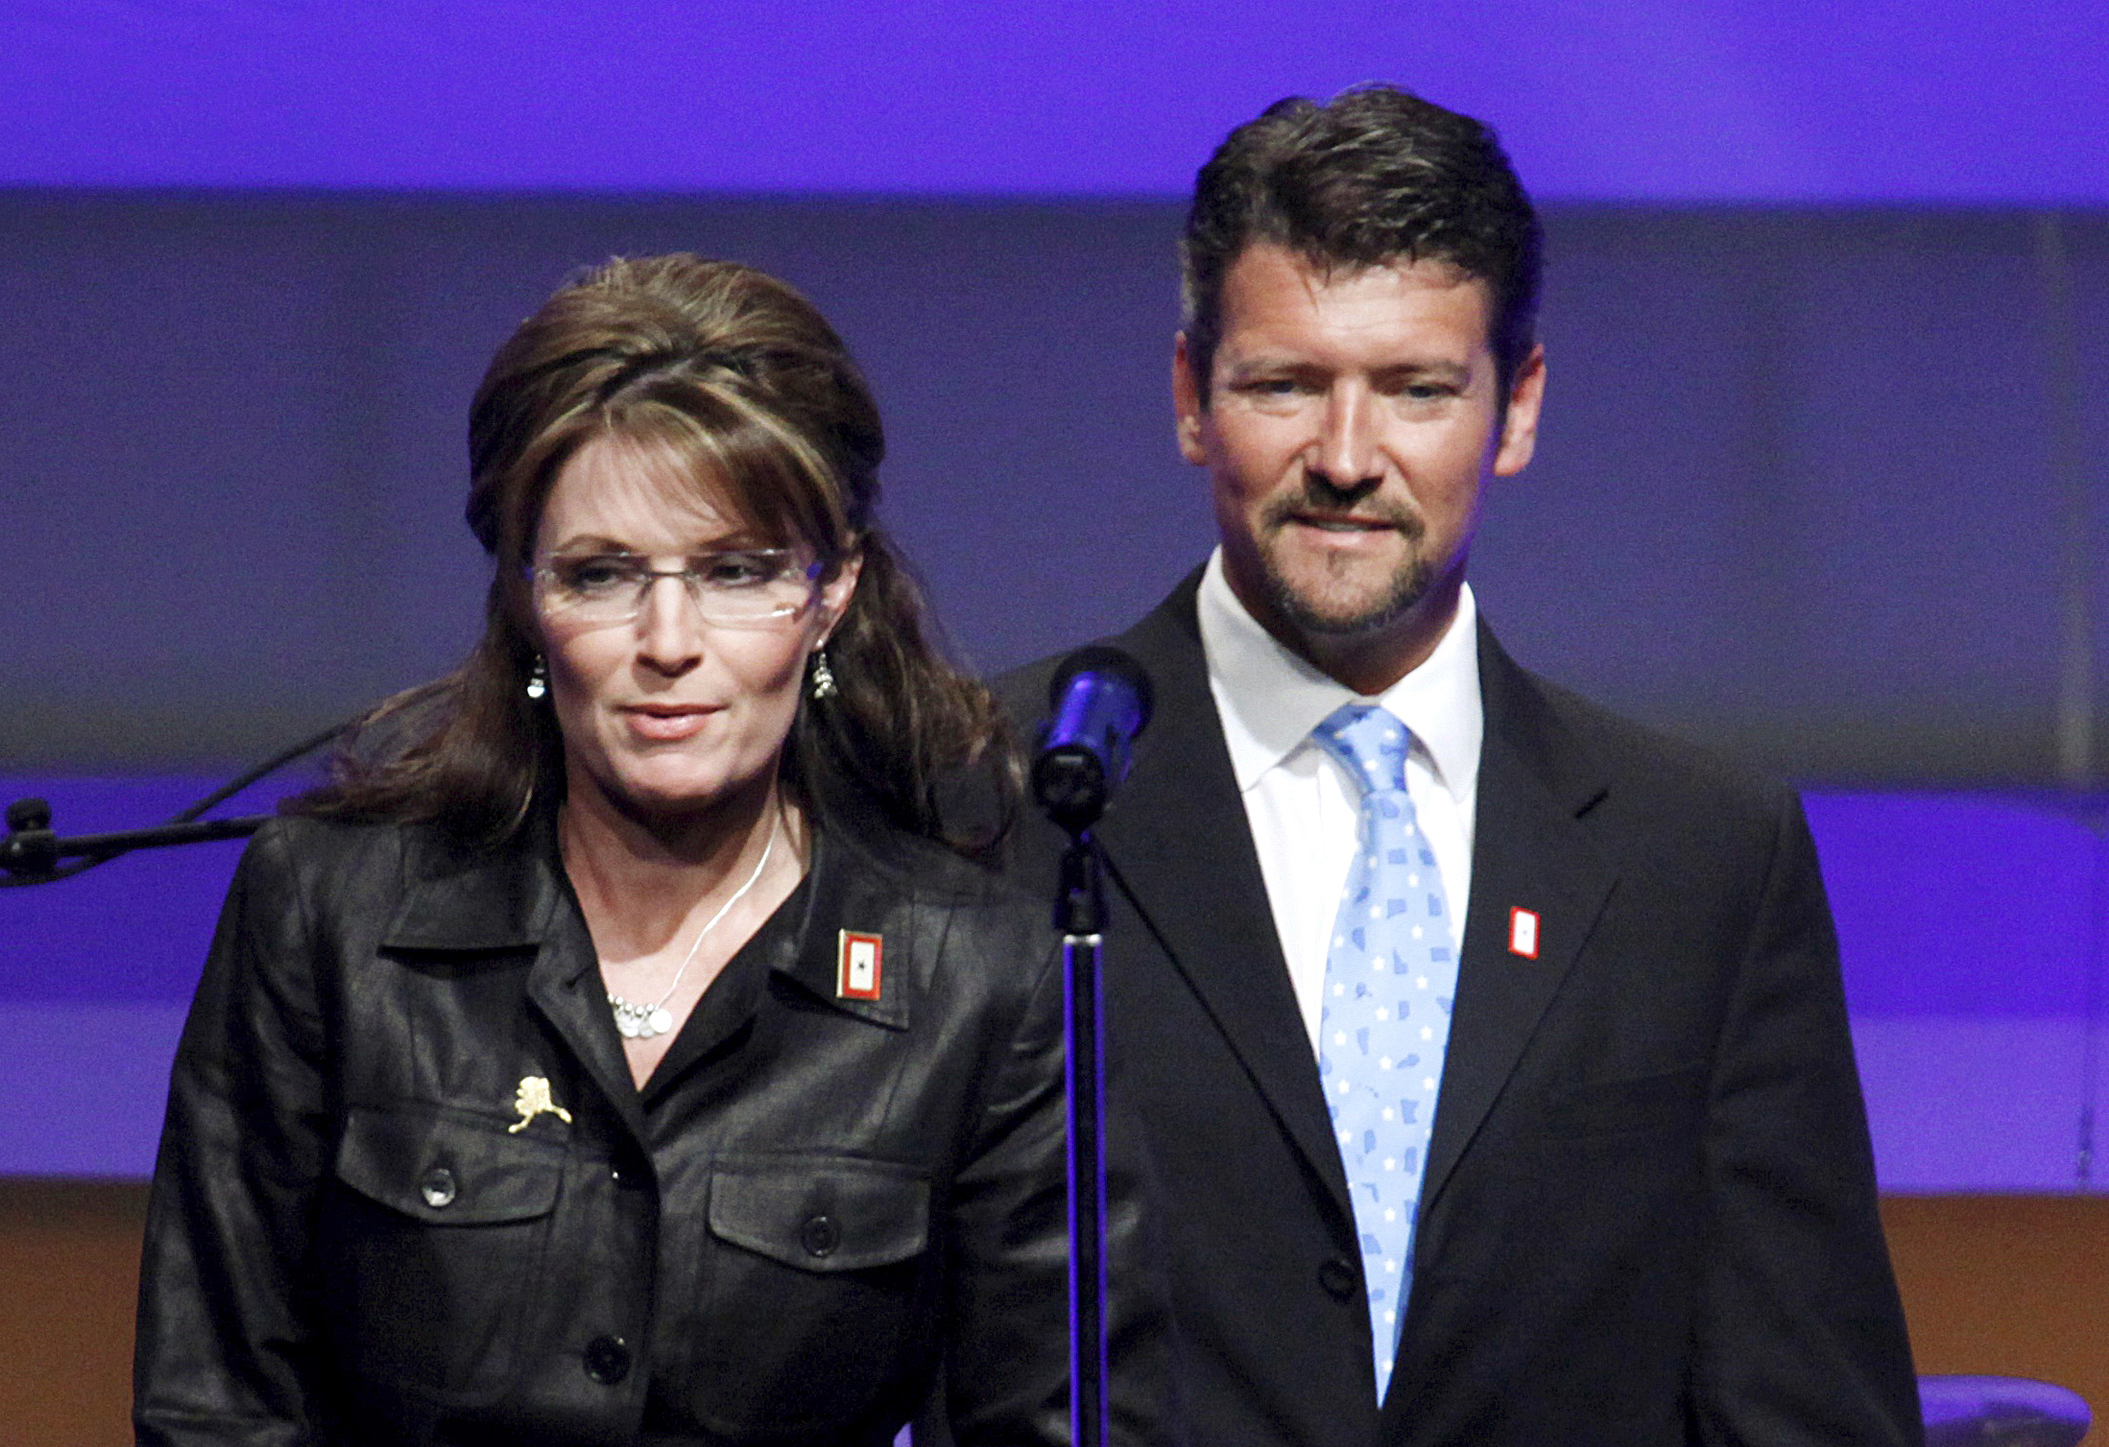 PHOTO: In this June 8, 2009, file photo, Republican Alaska Gov. Sarah Palin and her husband Todd Palin arrive at a Republican congressional fundraiser in Washington.